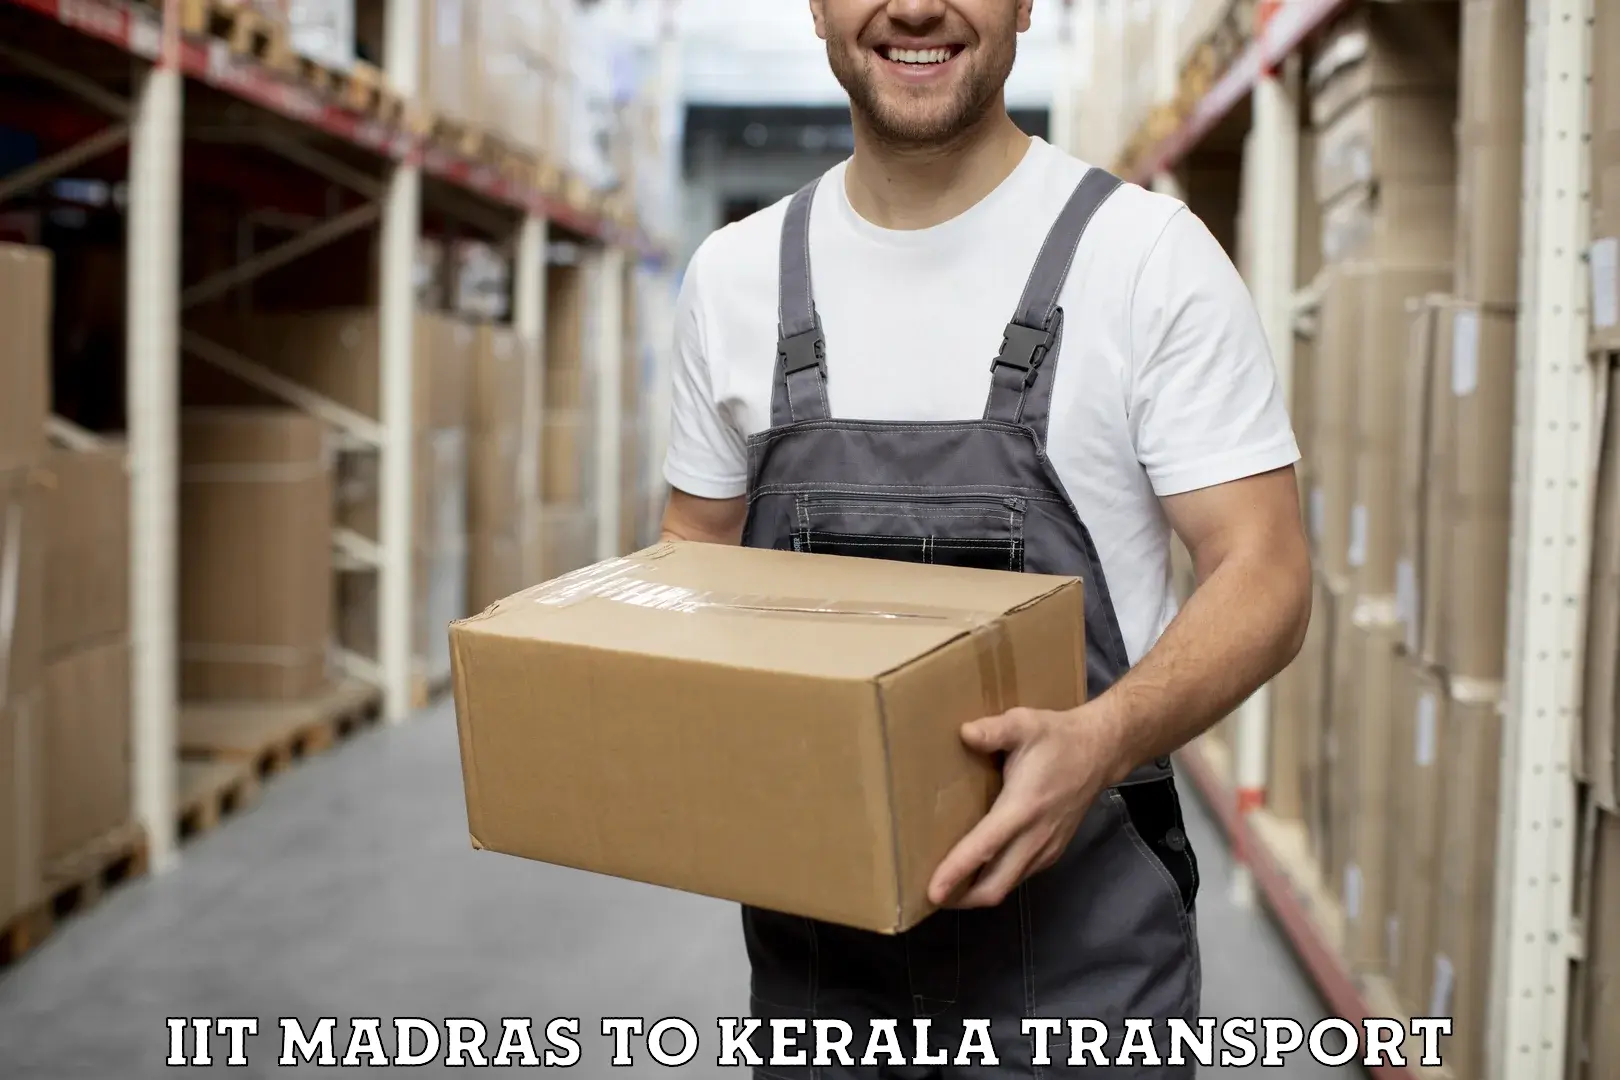 Nearby transport service IIT Madras to Pala